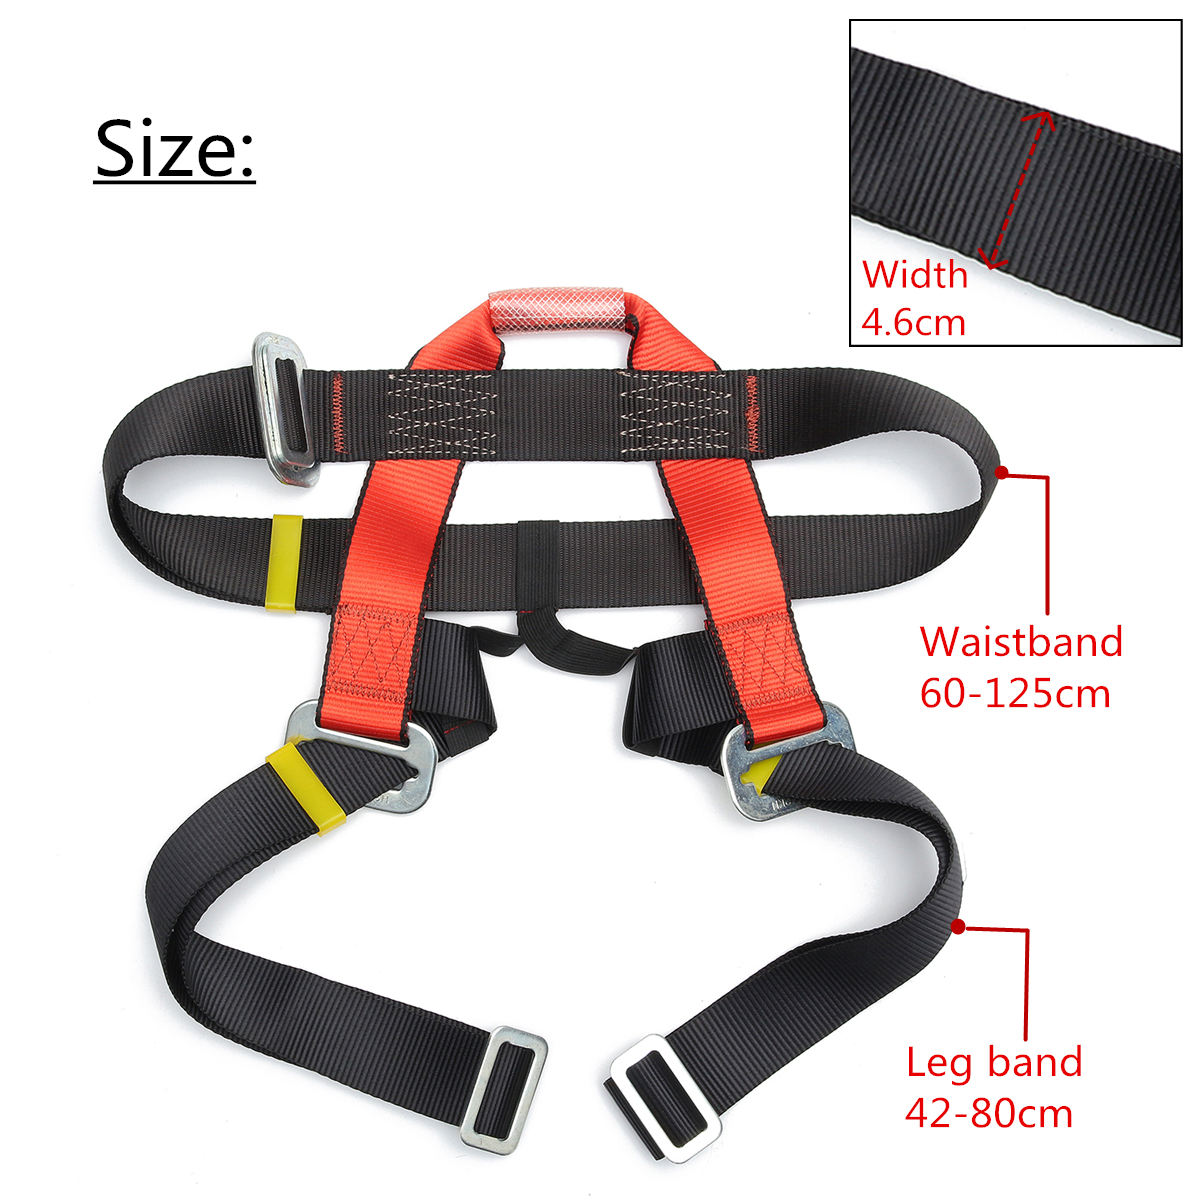 Outdoor-Mountain-Rock-Climbing-Rappelling-Harness-Bust-Belt-Rescue-Safety-Seat-Sitting-Strap-1130415-2